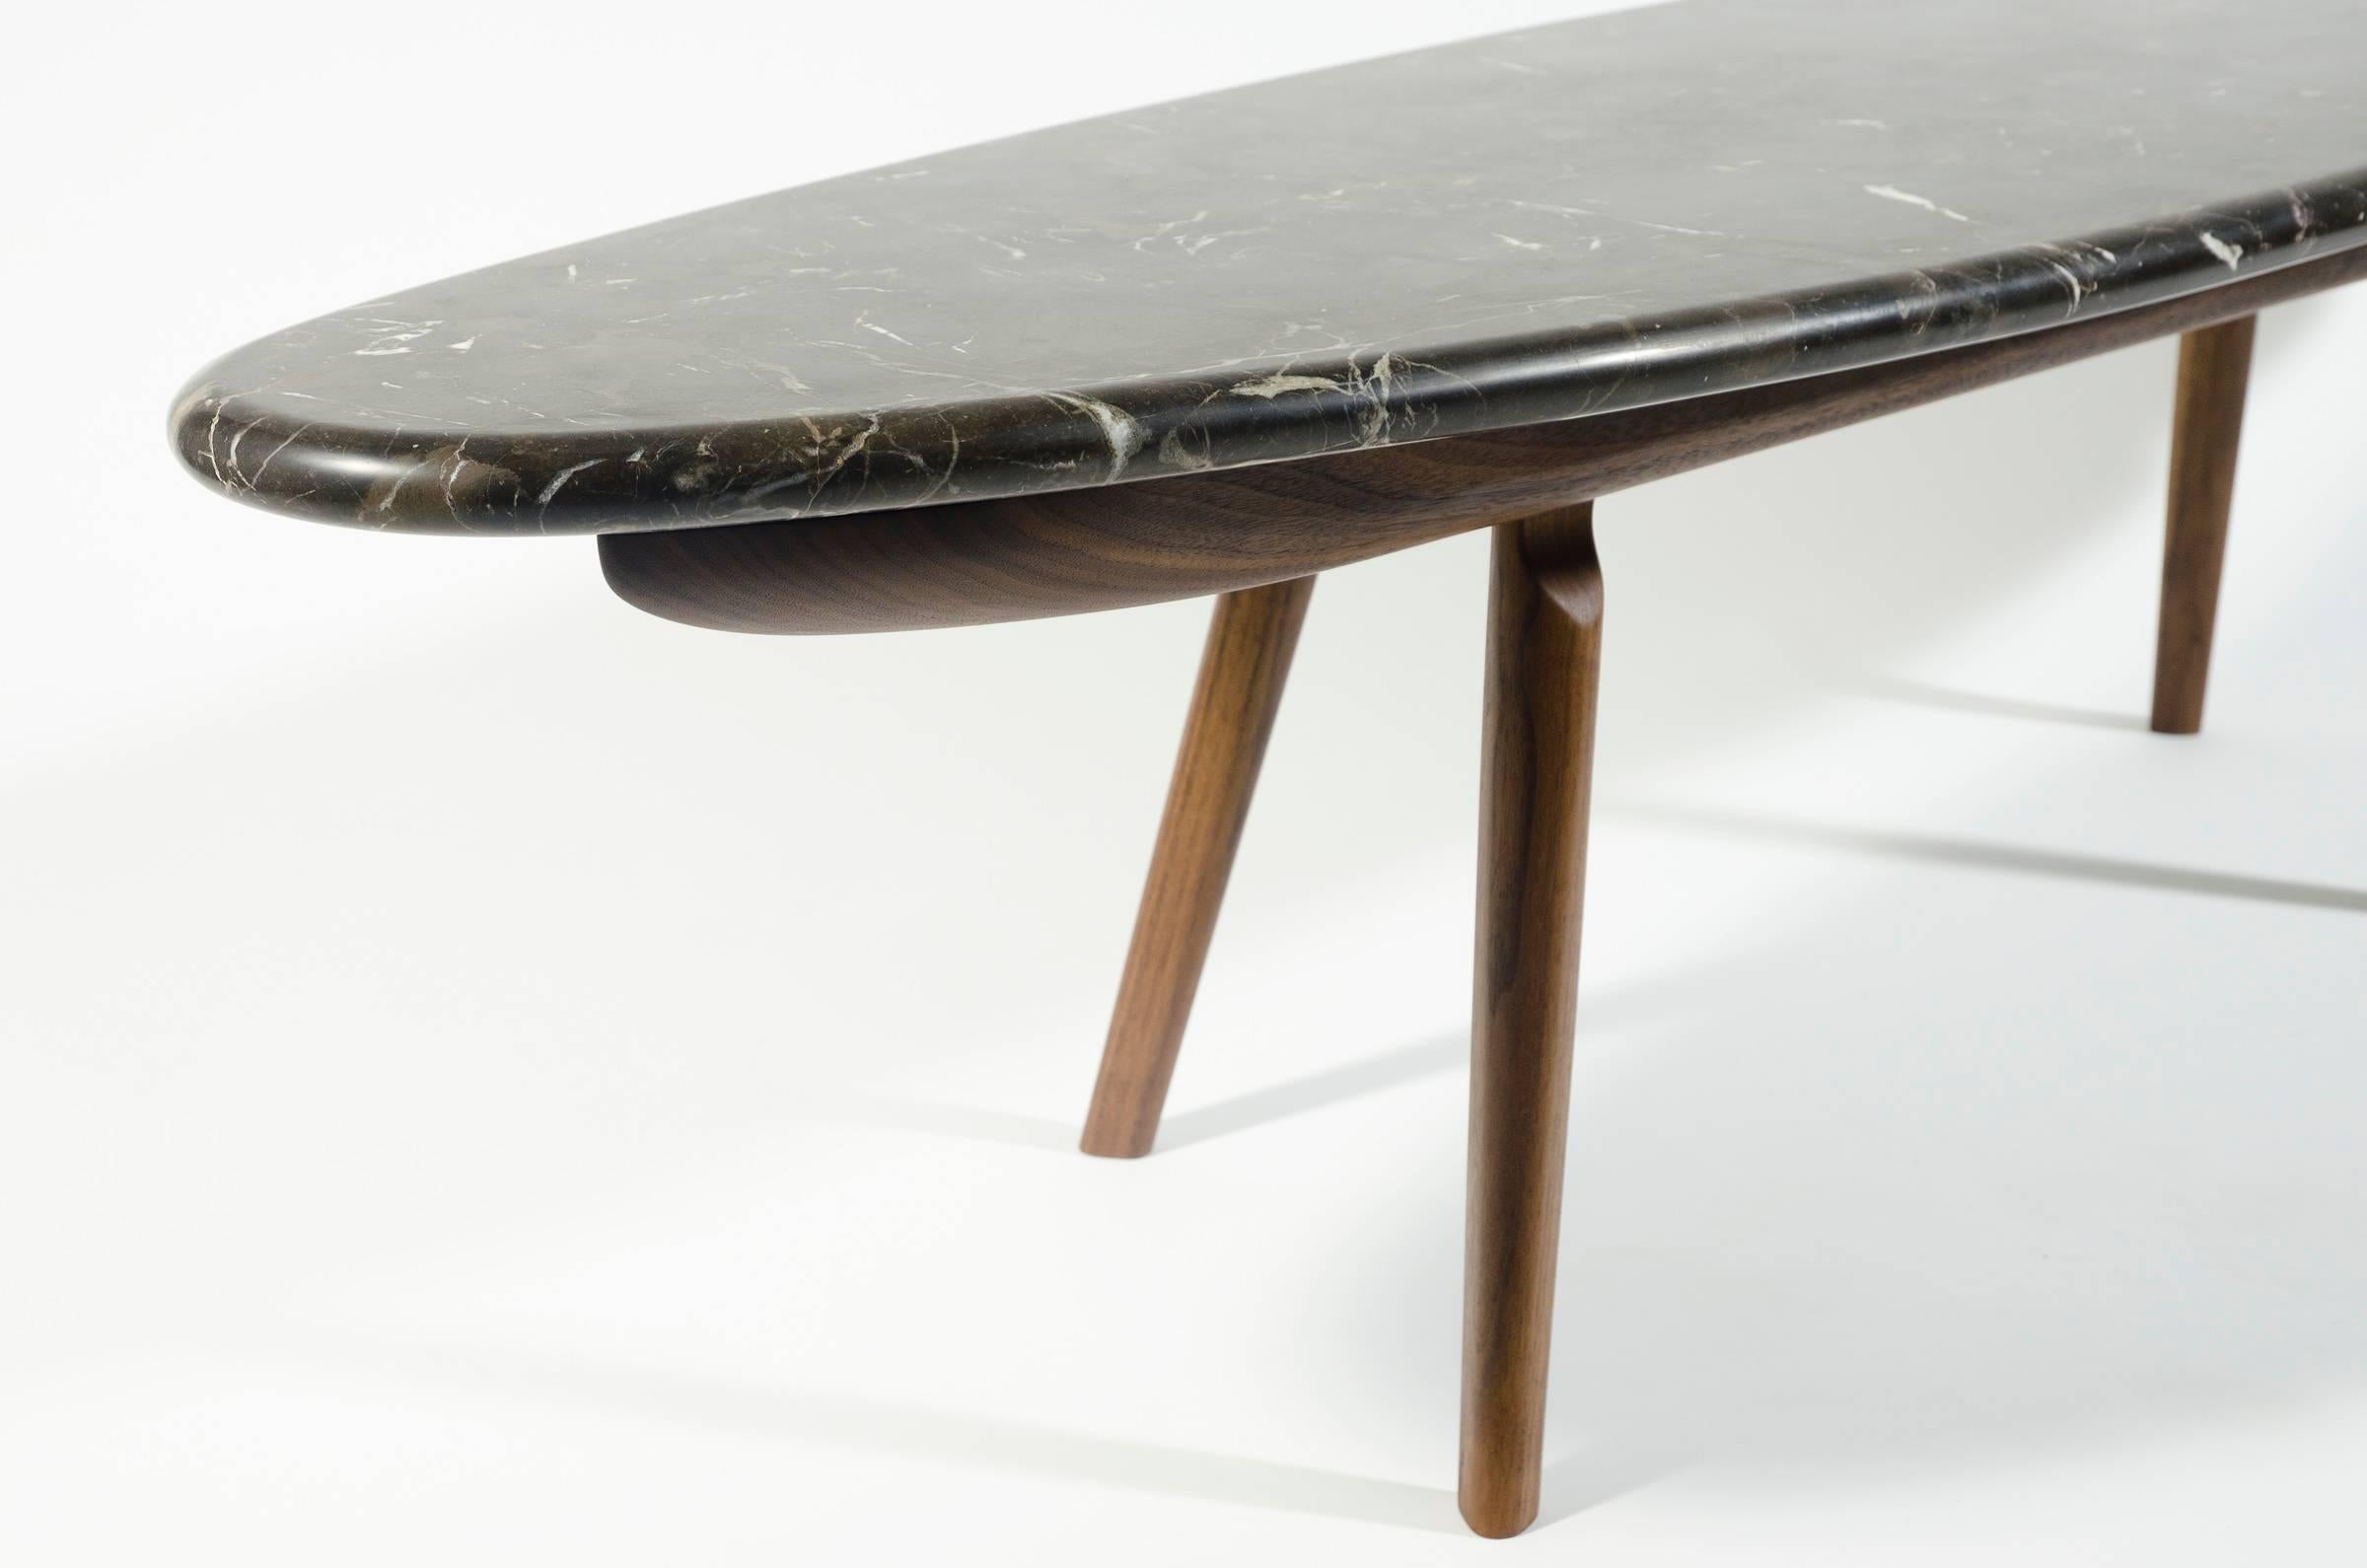 Contemporary Black Marble Stone and Walnut Wood Coffee Cocktail Table CBR Studio (Marmor) im Angebot